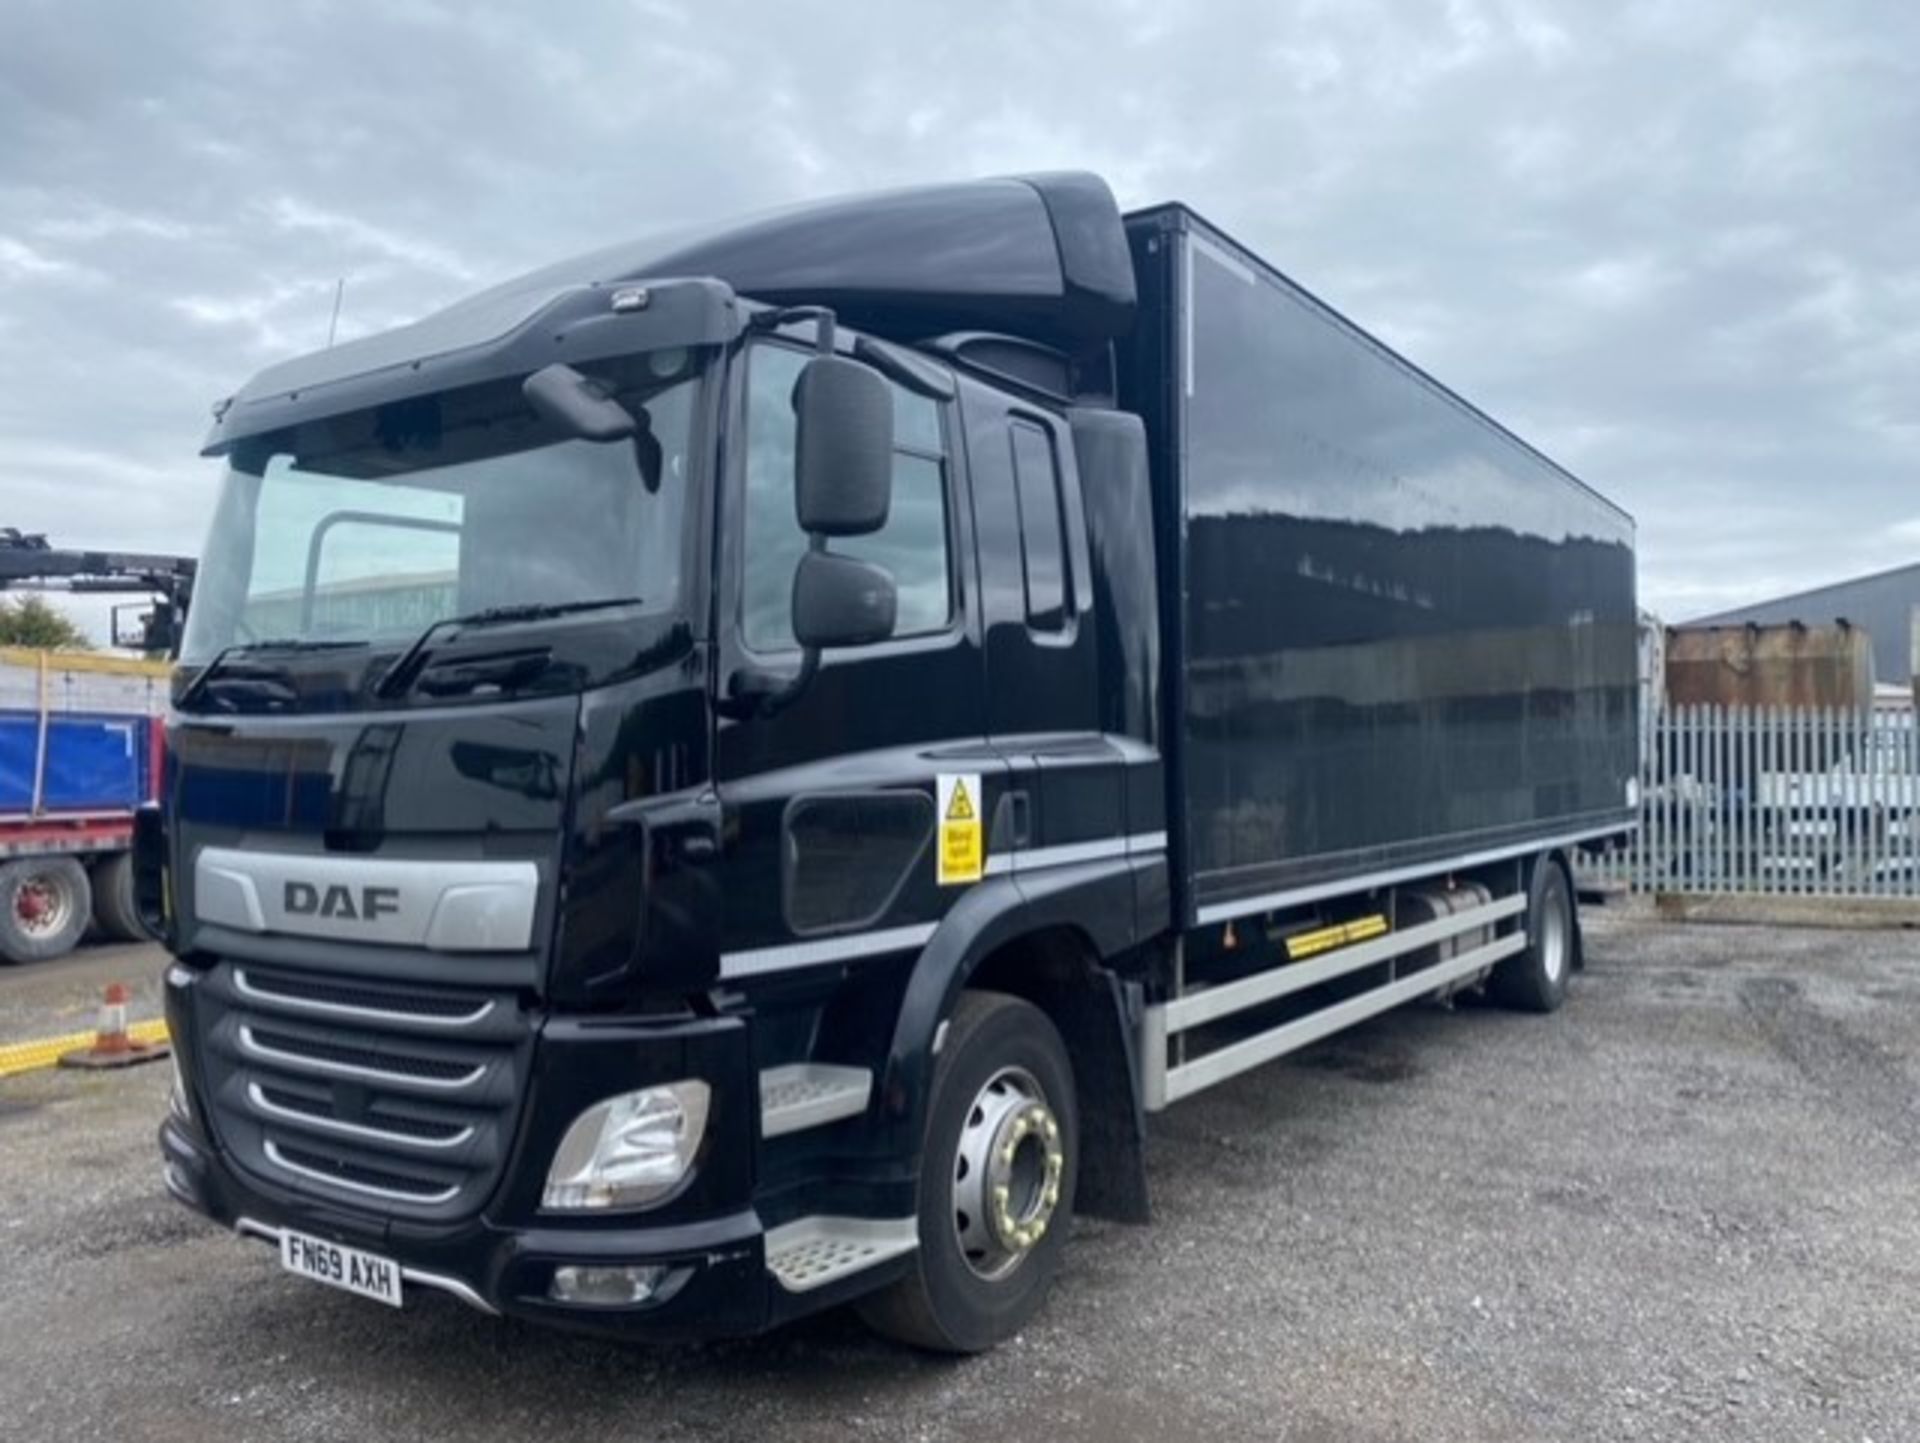 2019, DAF CF 260 FA - FN69 AXH (18 Ton Rigid Truck with Tail Lift) - Image 2 of 22